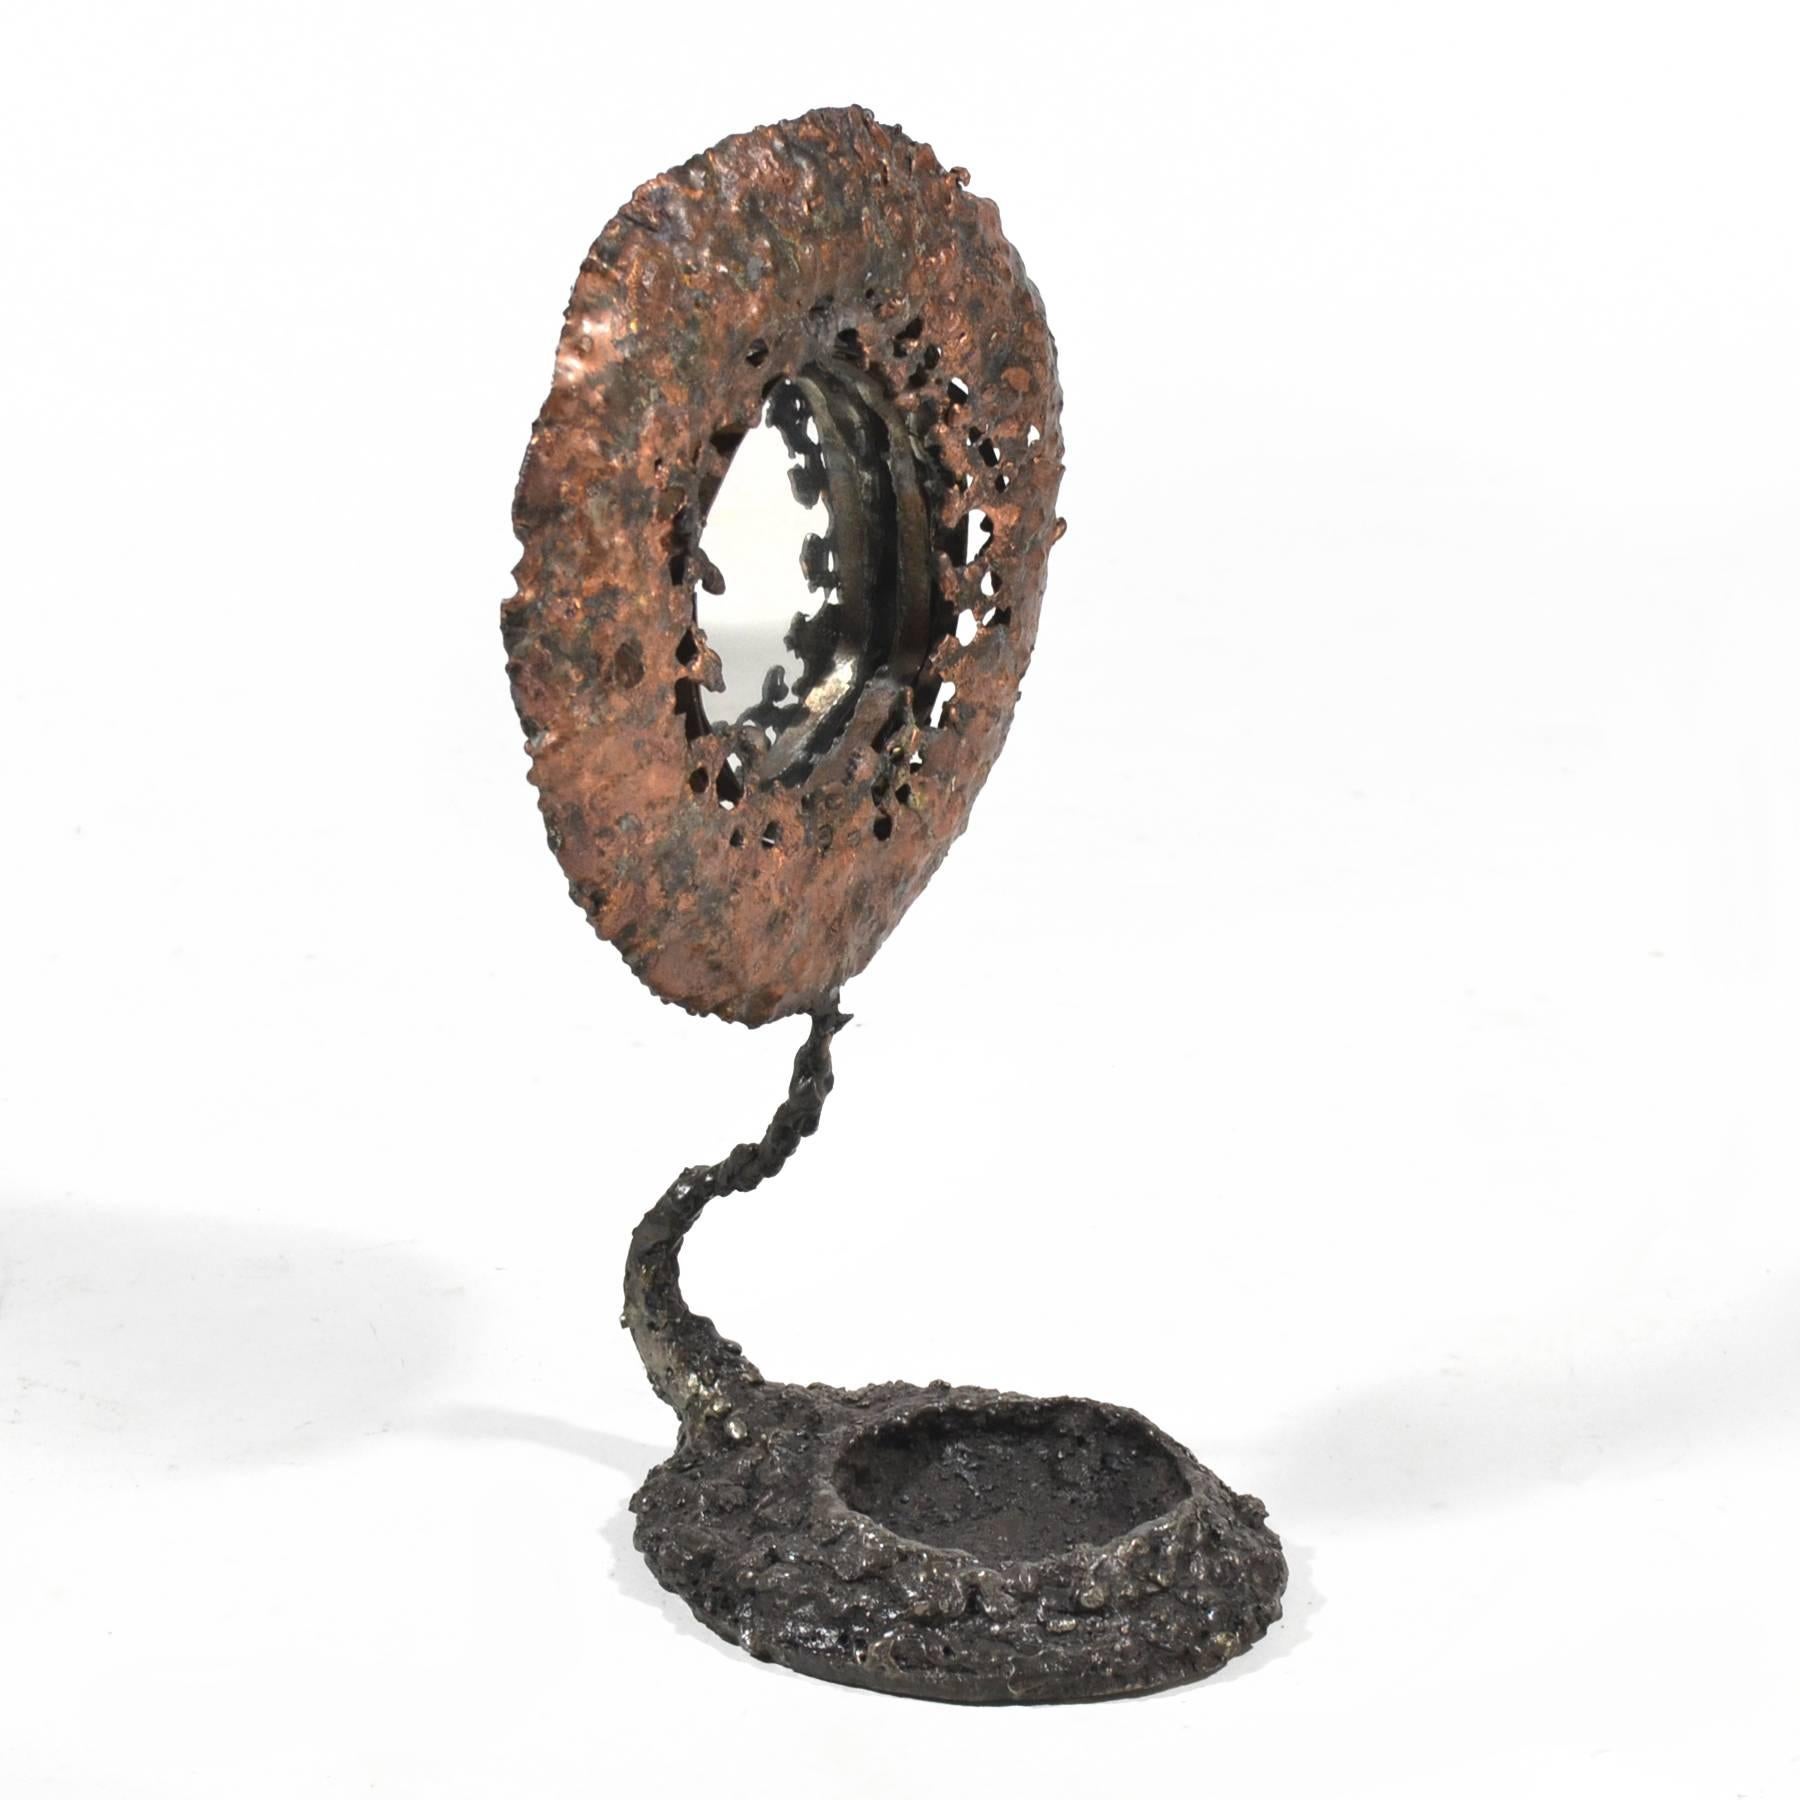 The sculptures of James Bearden are stylistically varied, but always sophisticated and visually complex. Most recently he has begun to experiment with functional works such as lamps/ lighting, case goods, and mirrors such as this one. A sculpture